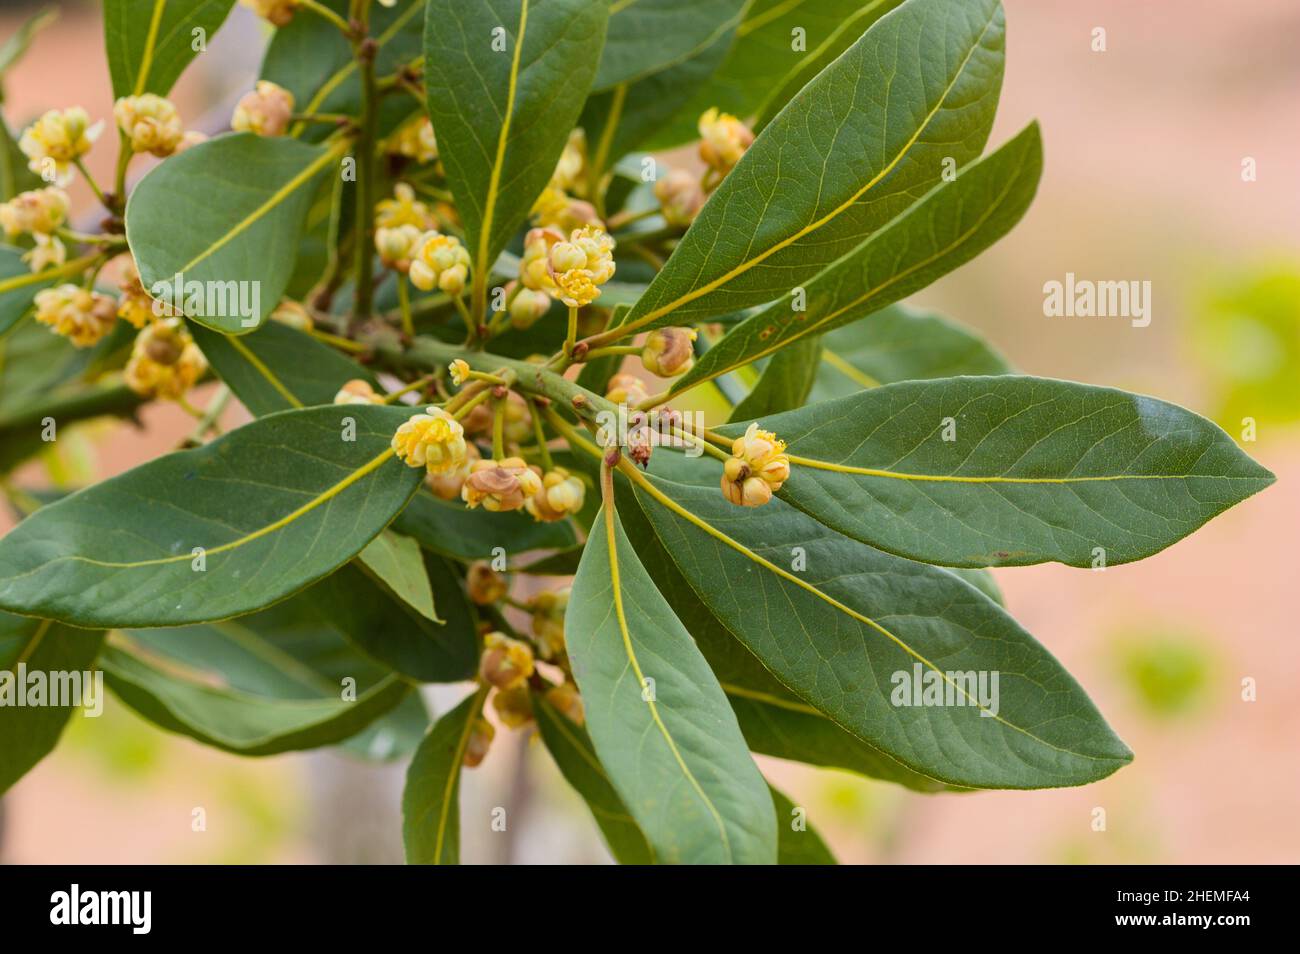 Close-up of a branch of the laurel tree that has green leaves and flowers and flower buds of Laurus nobilis L. Stock Photo